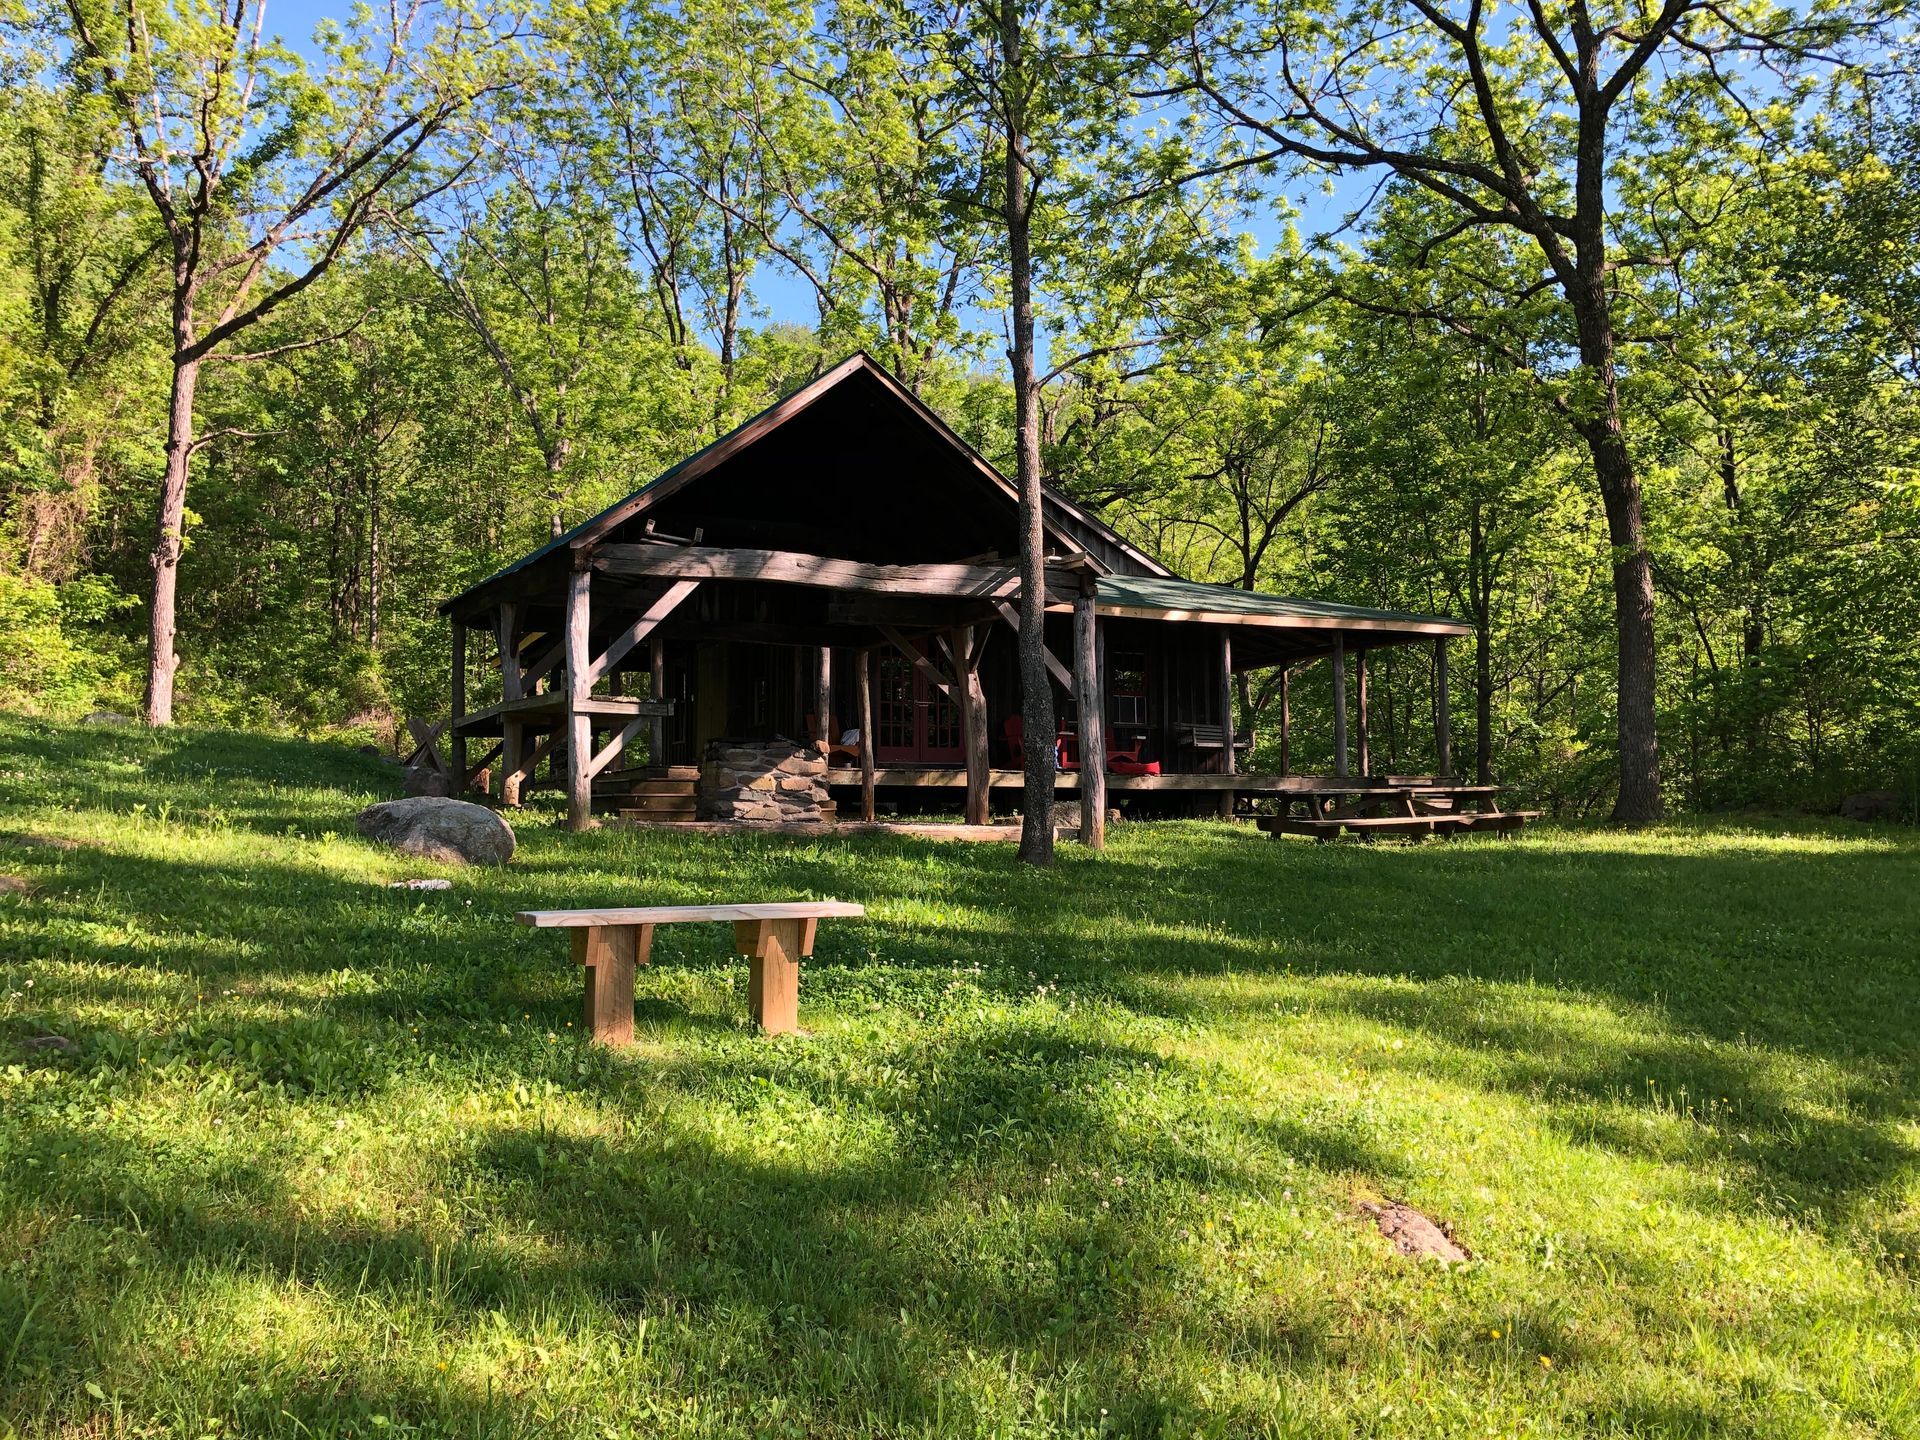 The front view of Conley cabin shows a wooden porch and multiple picnic tables.